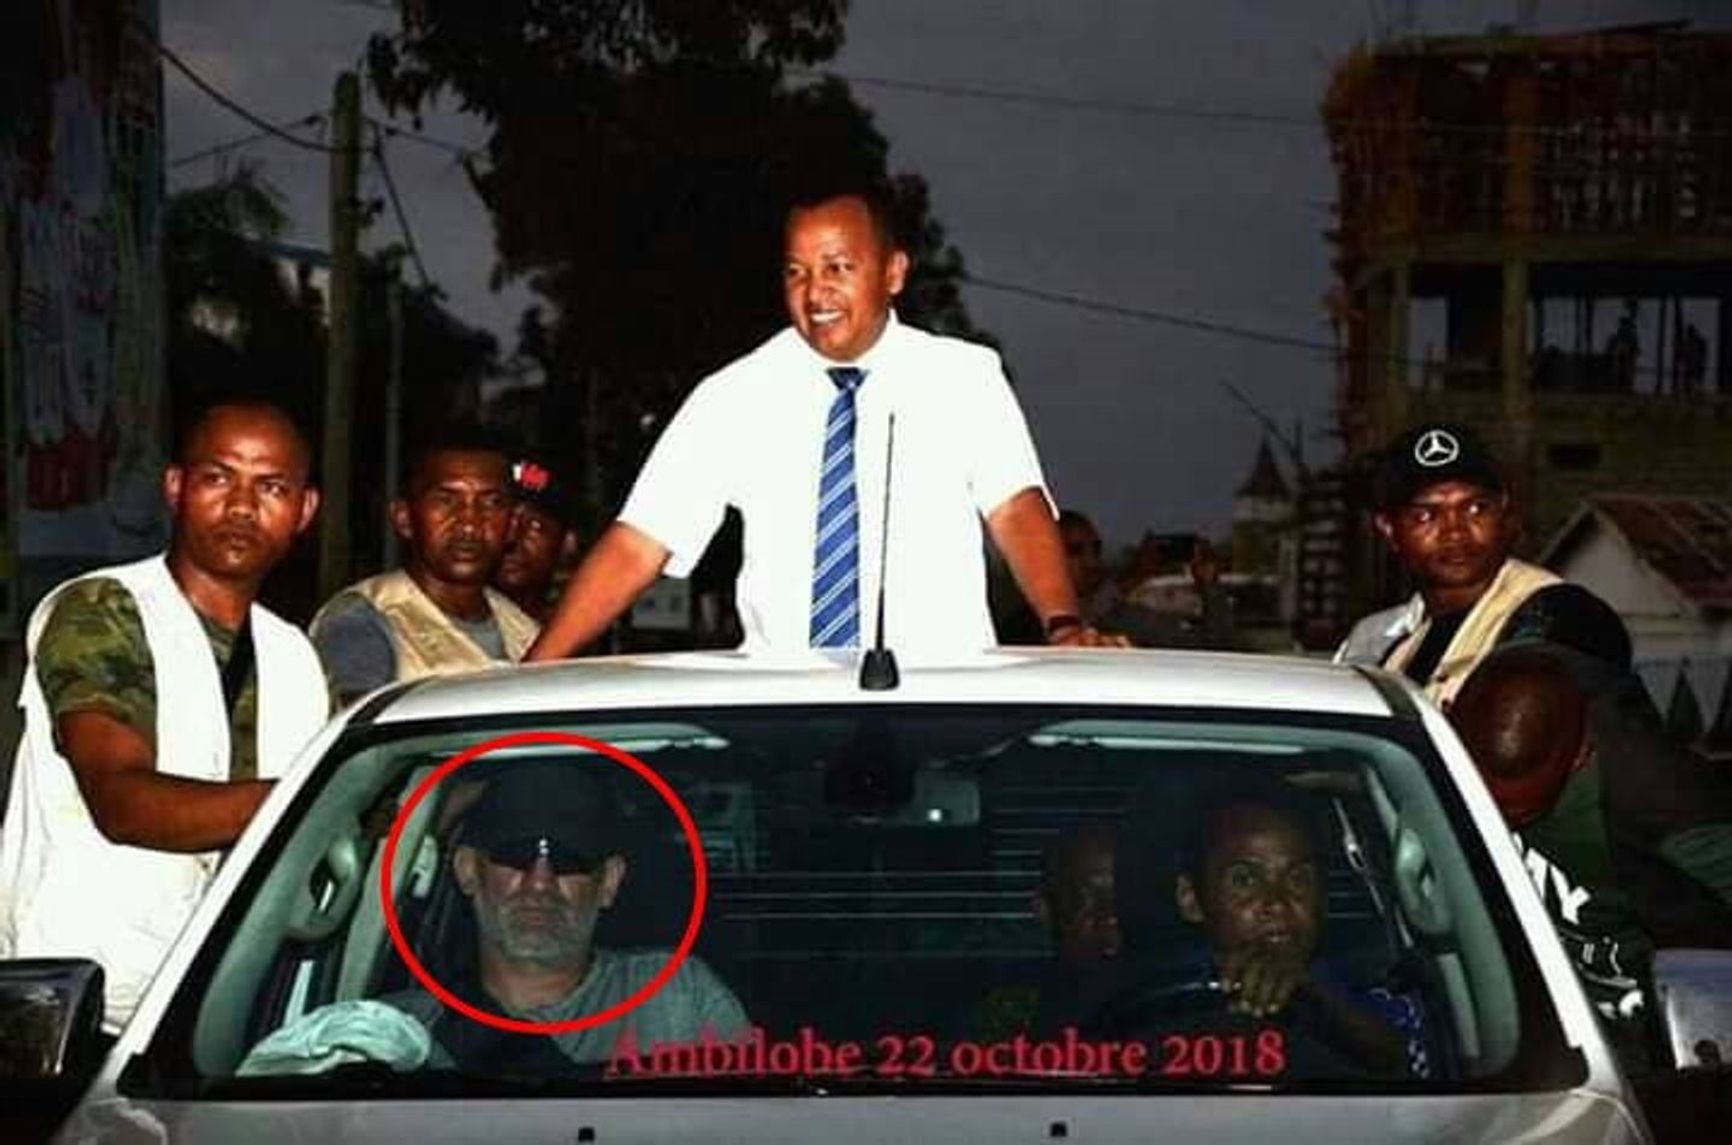 “Mazai” (in the car on the left) during the pastor's campaign